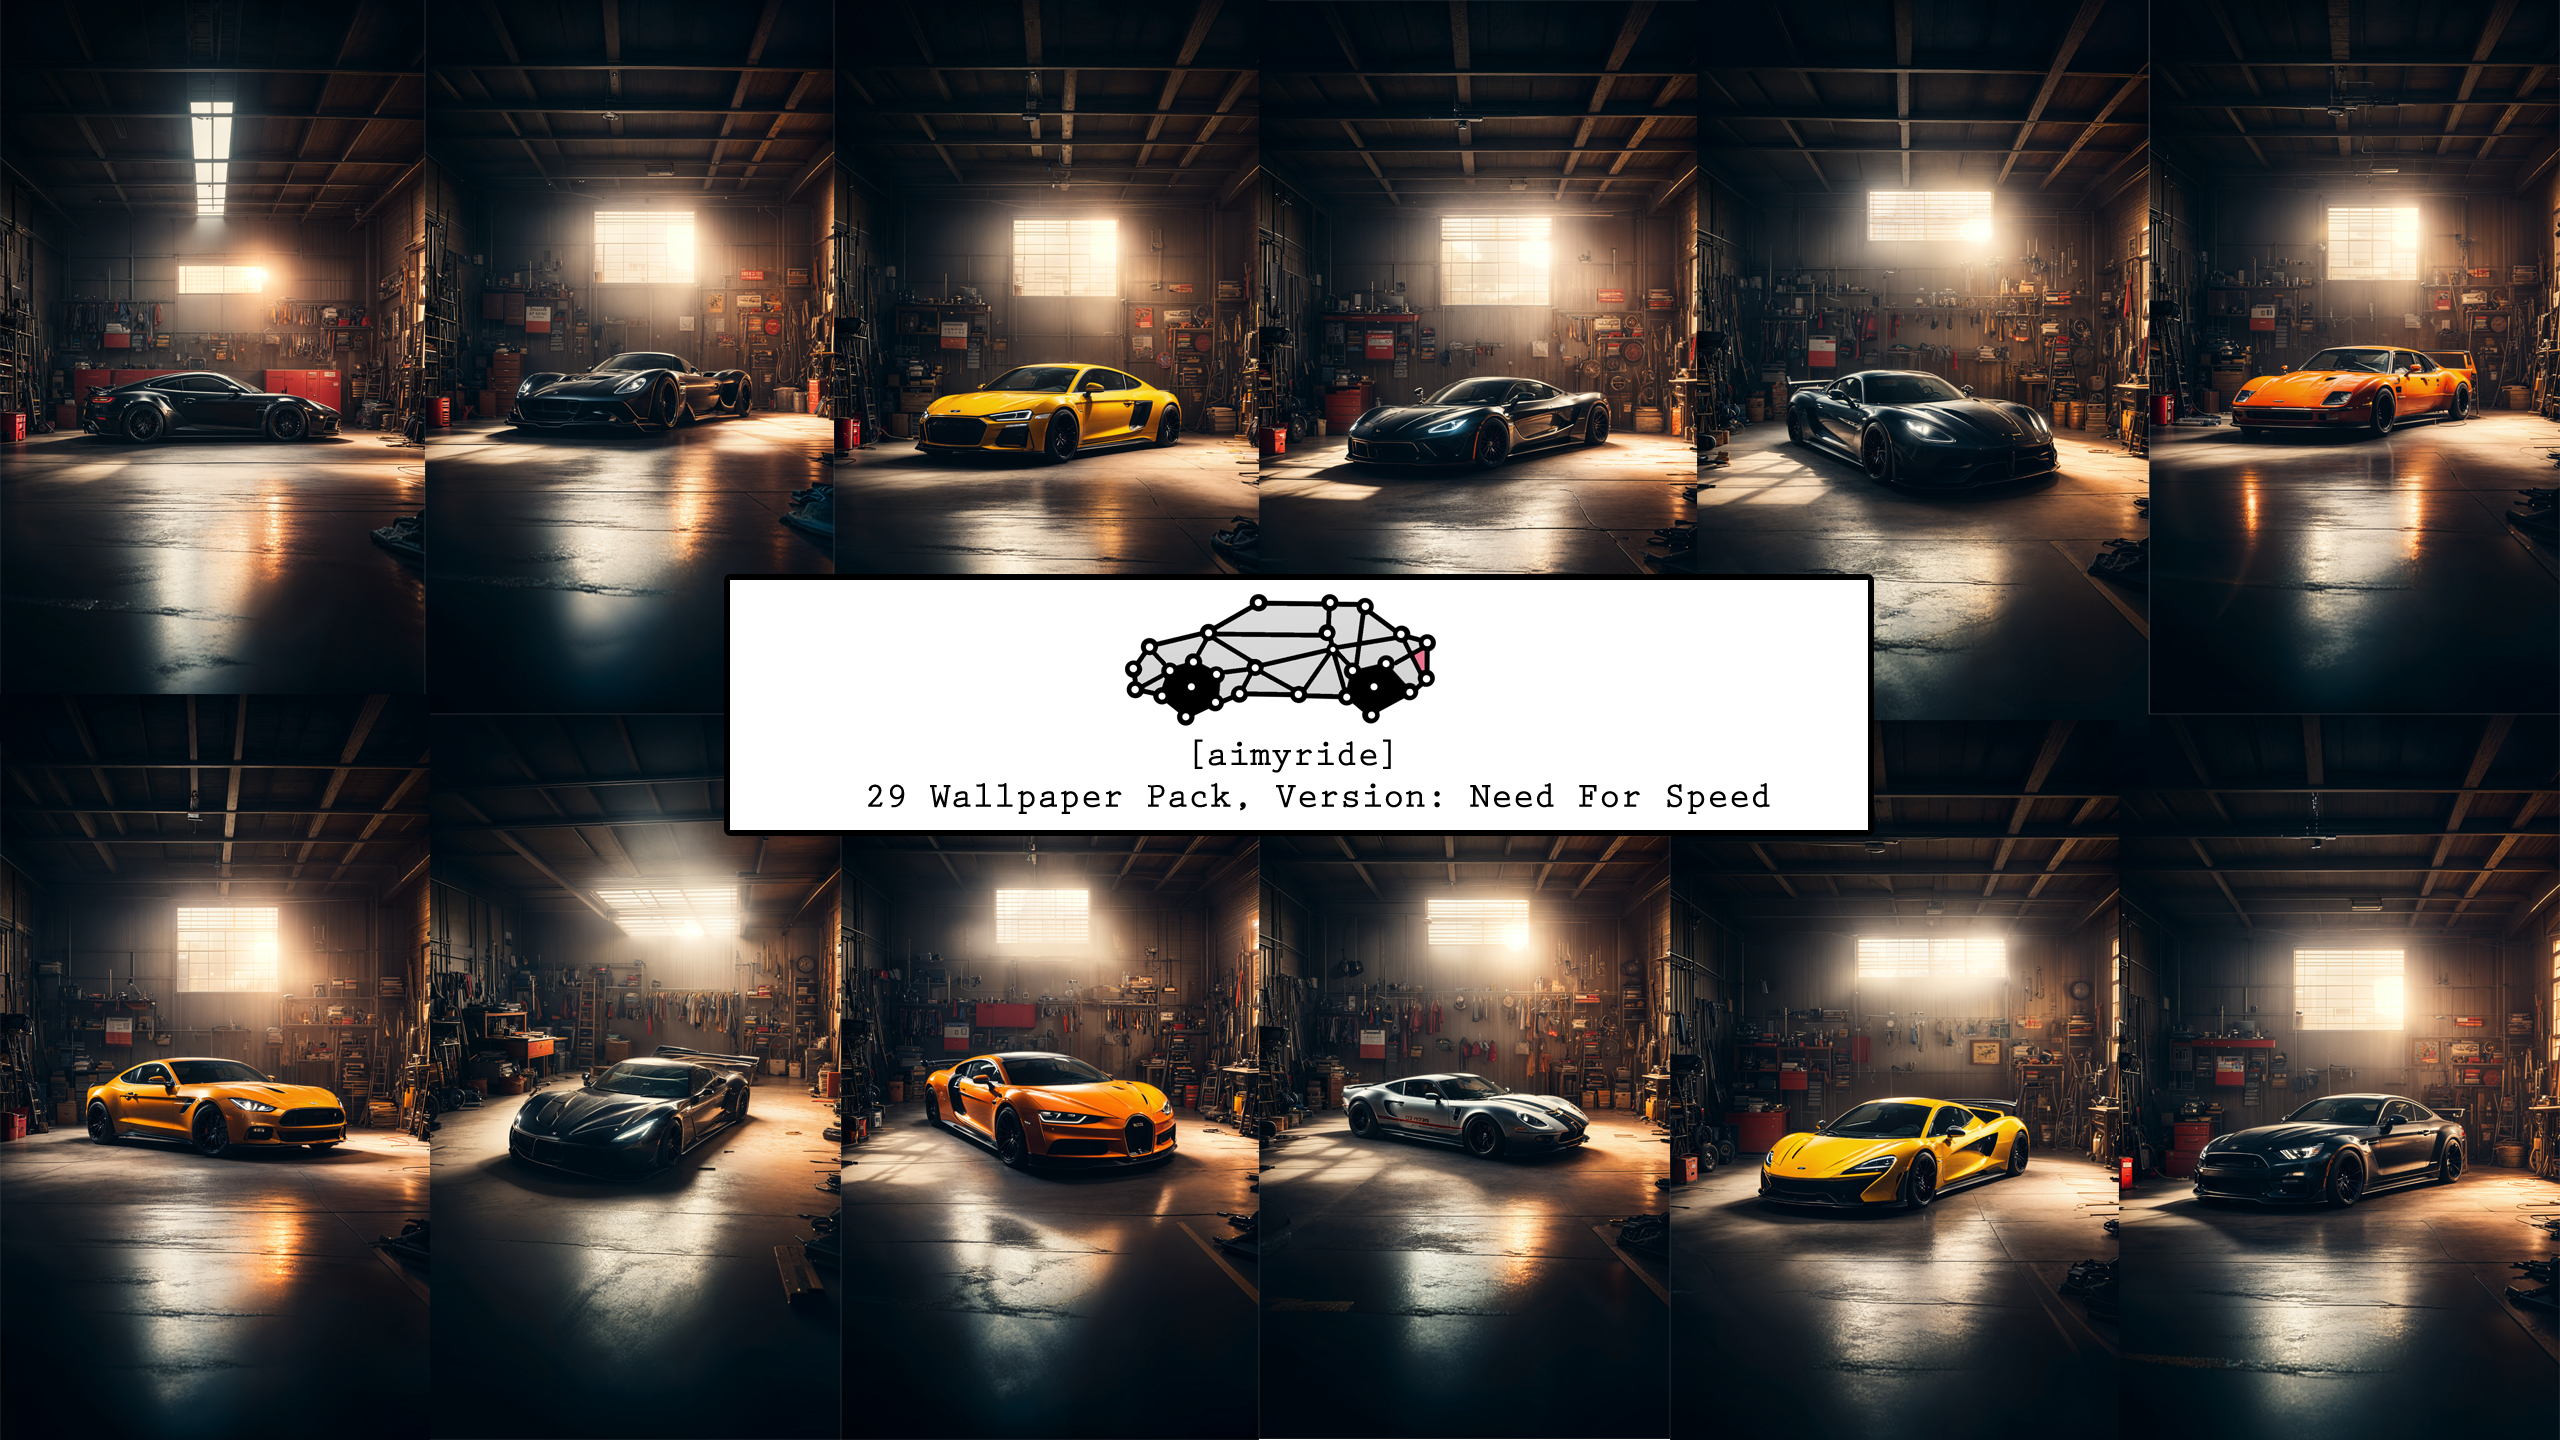 Collection of aimyride wallpapers, need for speed style only